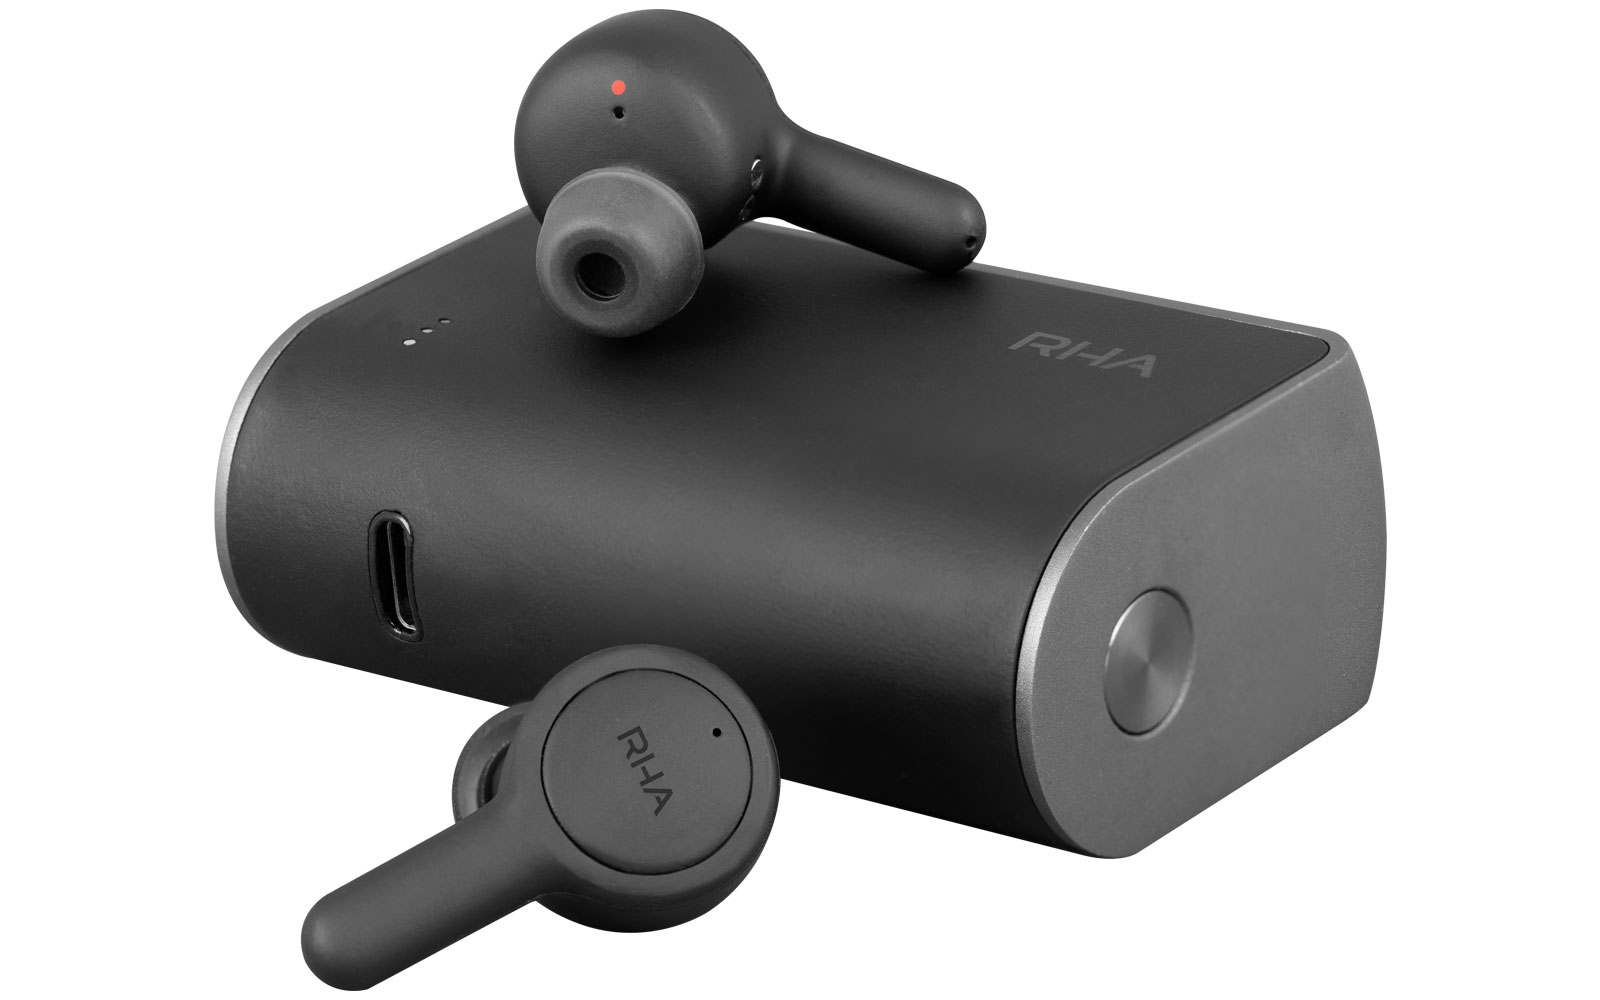 RHA's TrueConnect 2 earbuds have longer battery life and 'refined' sound | DeviceDaily.com